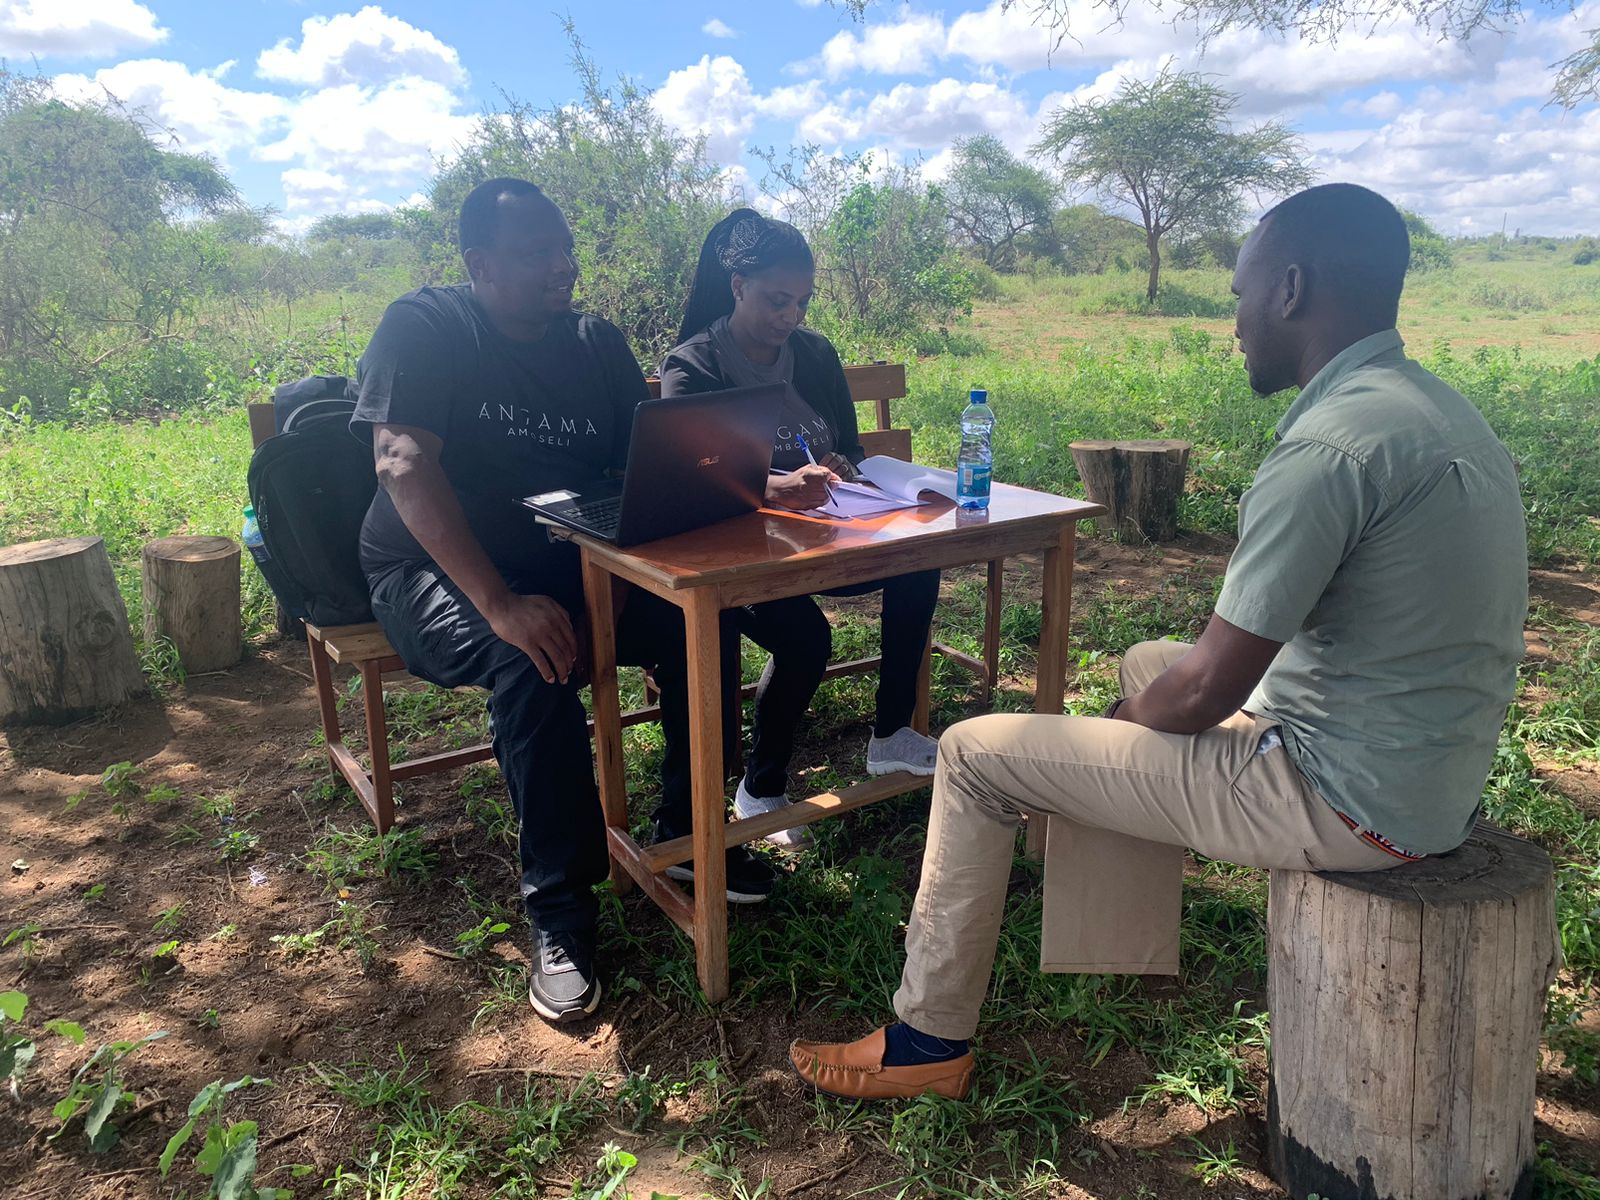 Some of the team from the Mara and Nairobi helped interview candidates